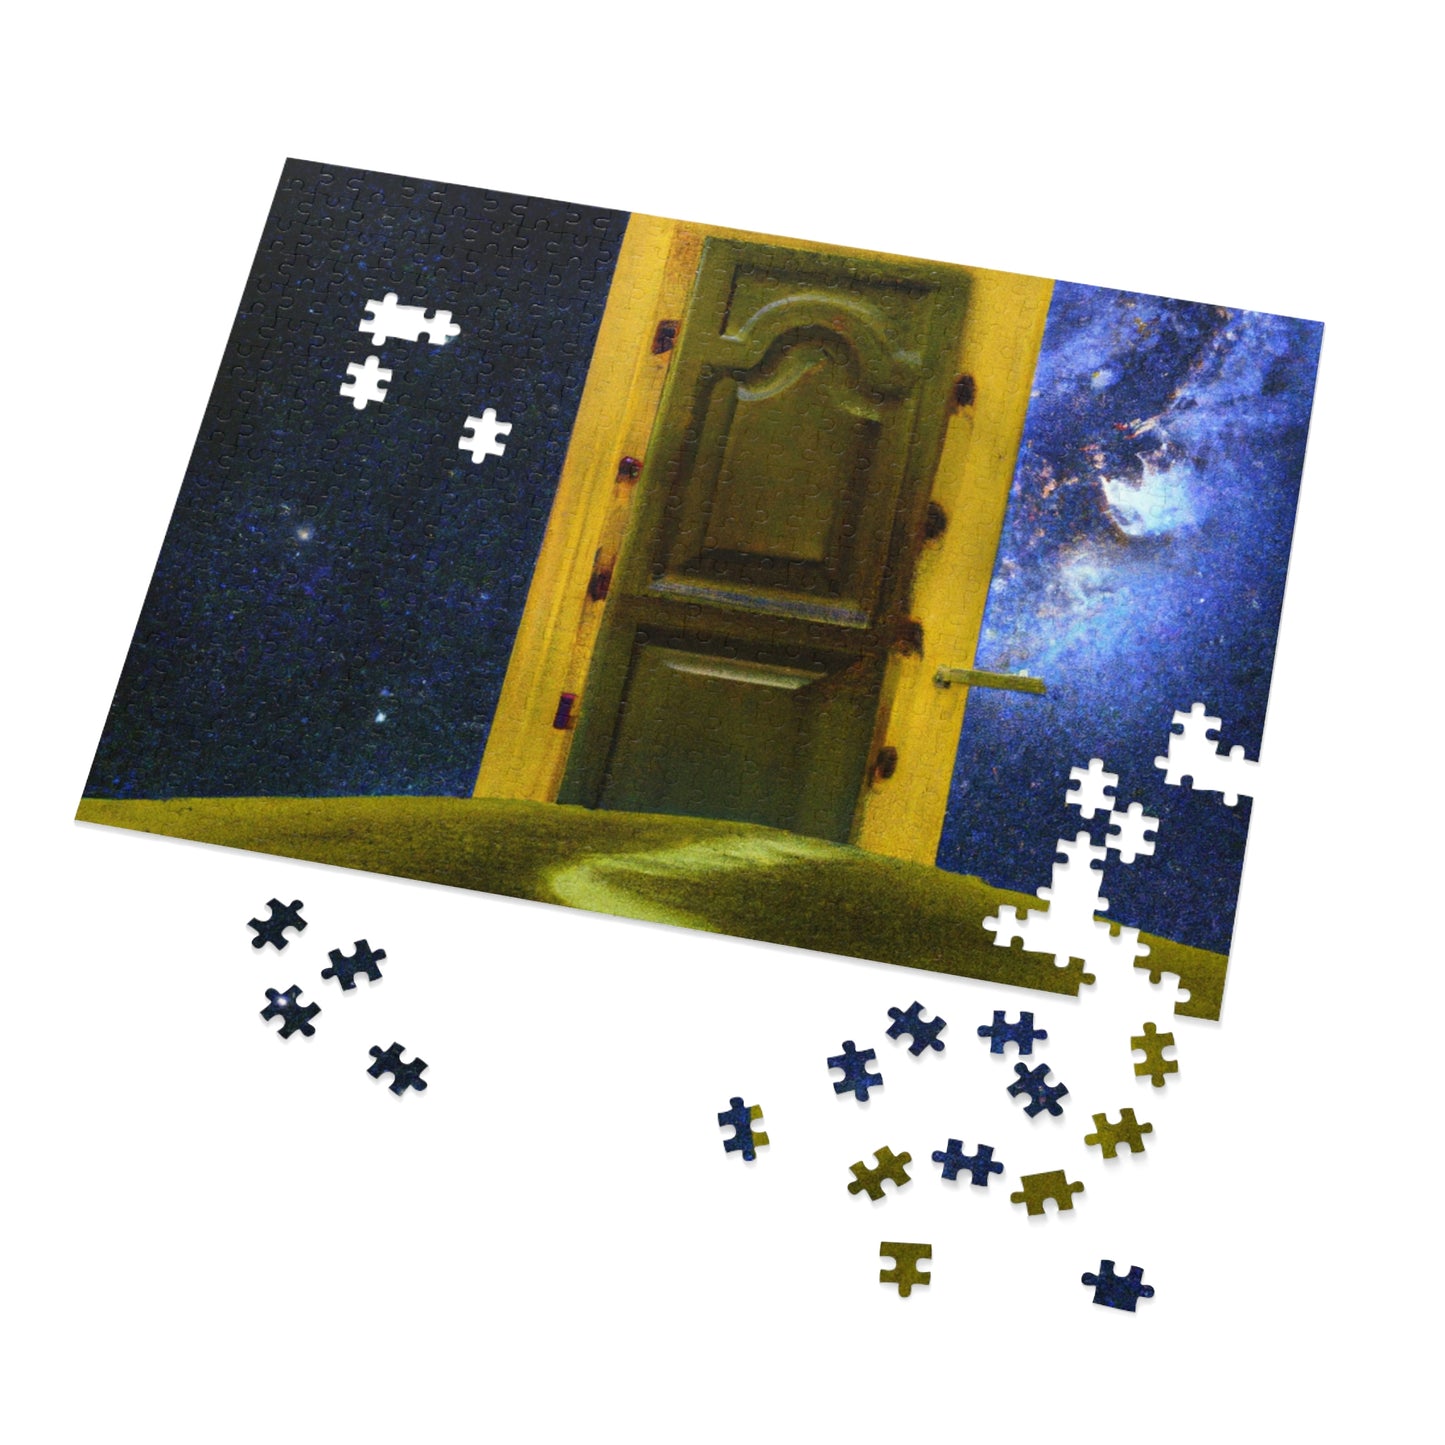 The Heavenly Threshold - The Alien Jigsaw Puzzle